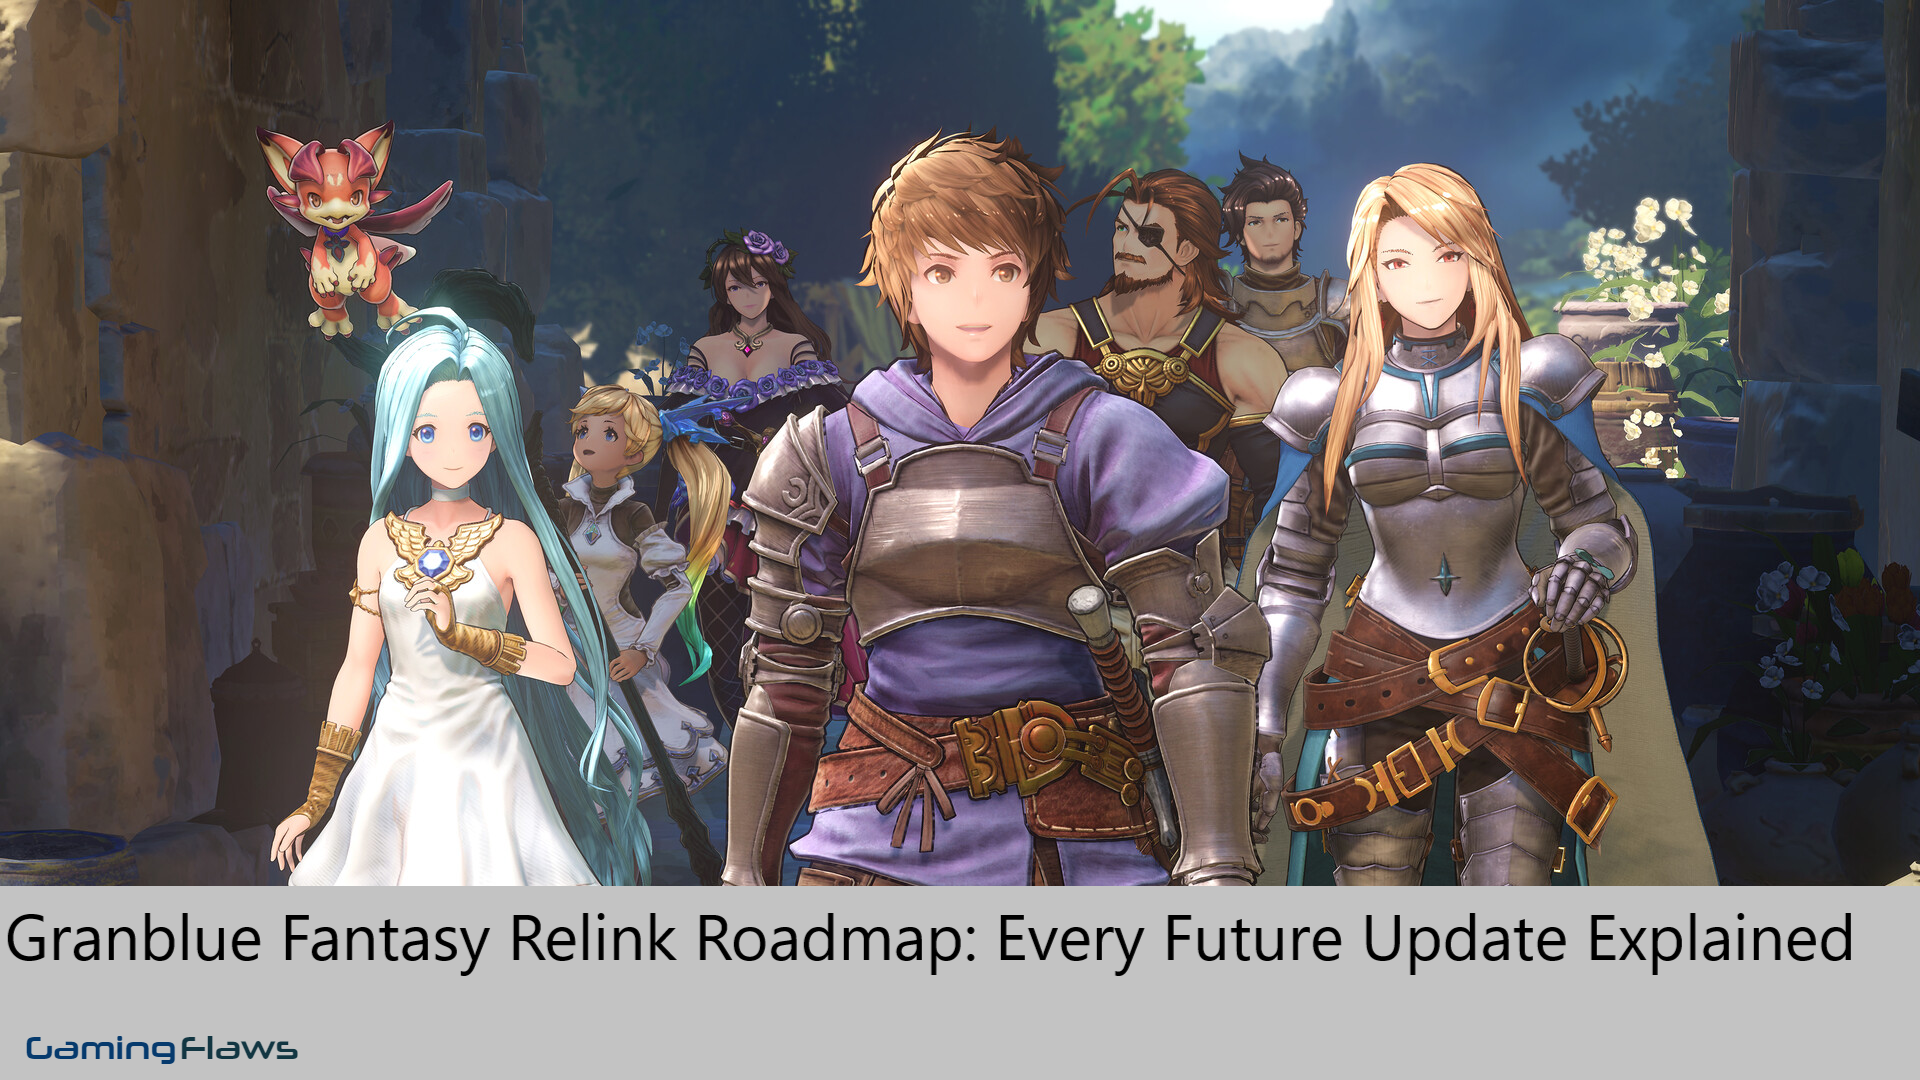 Granblue Fantasy Relink Roadmap: Every Future Update Explained